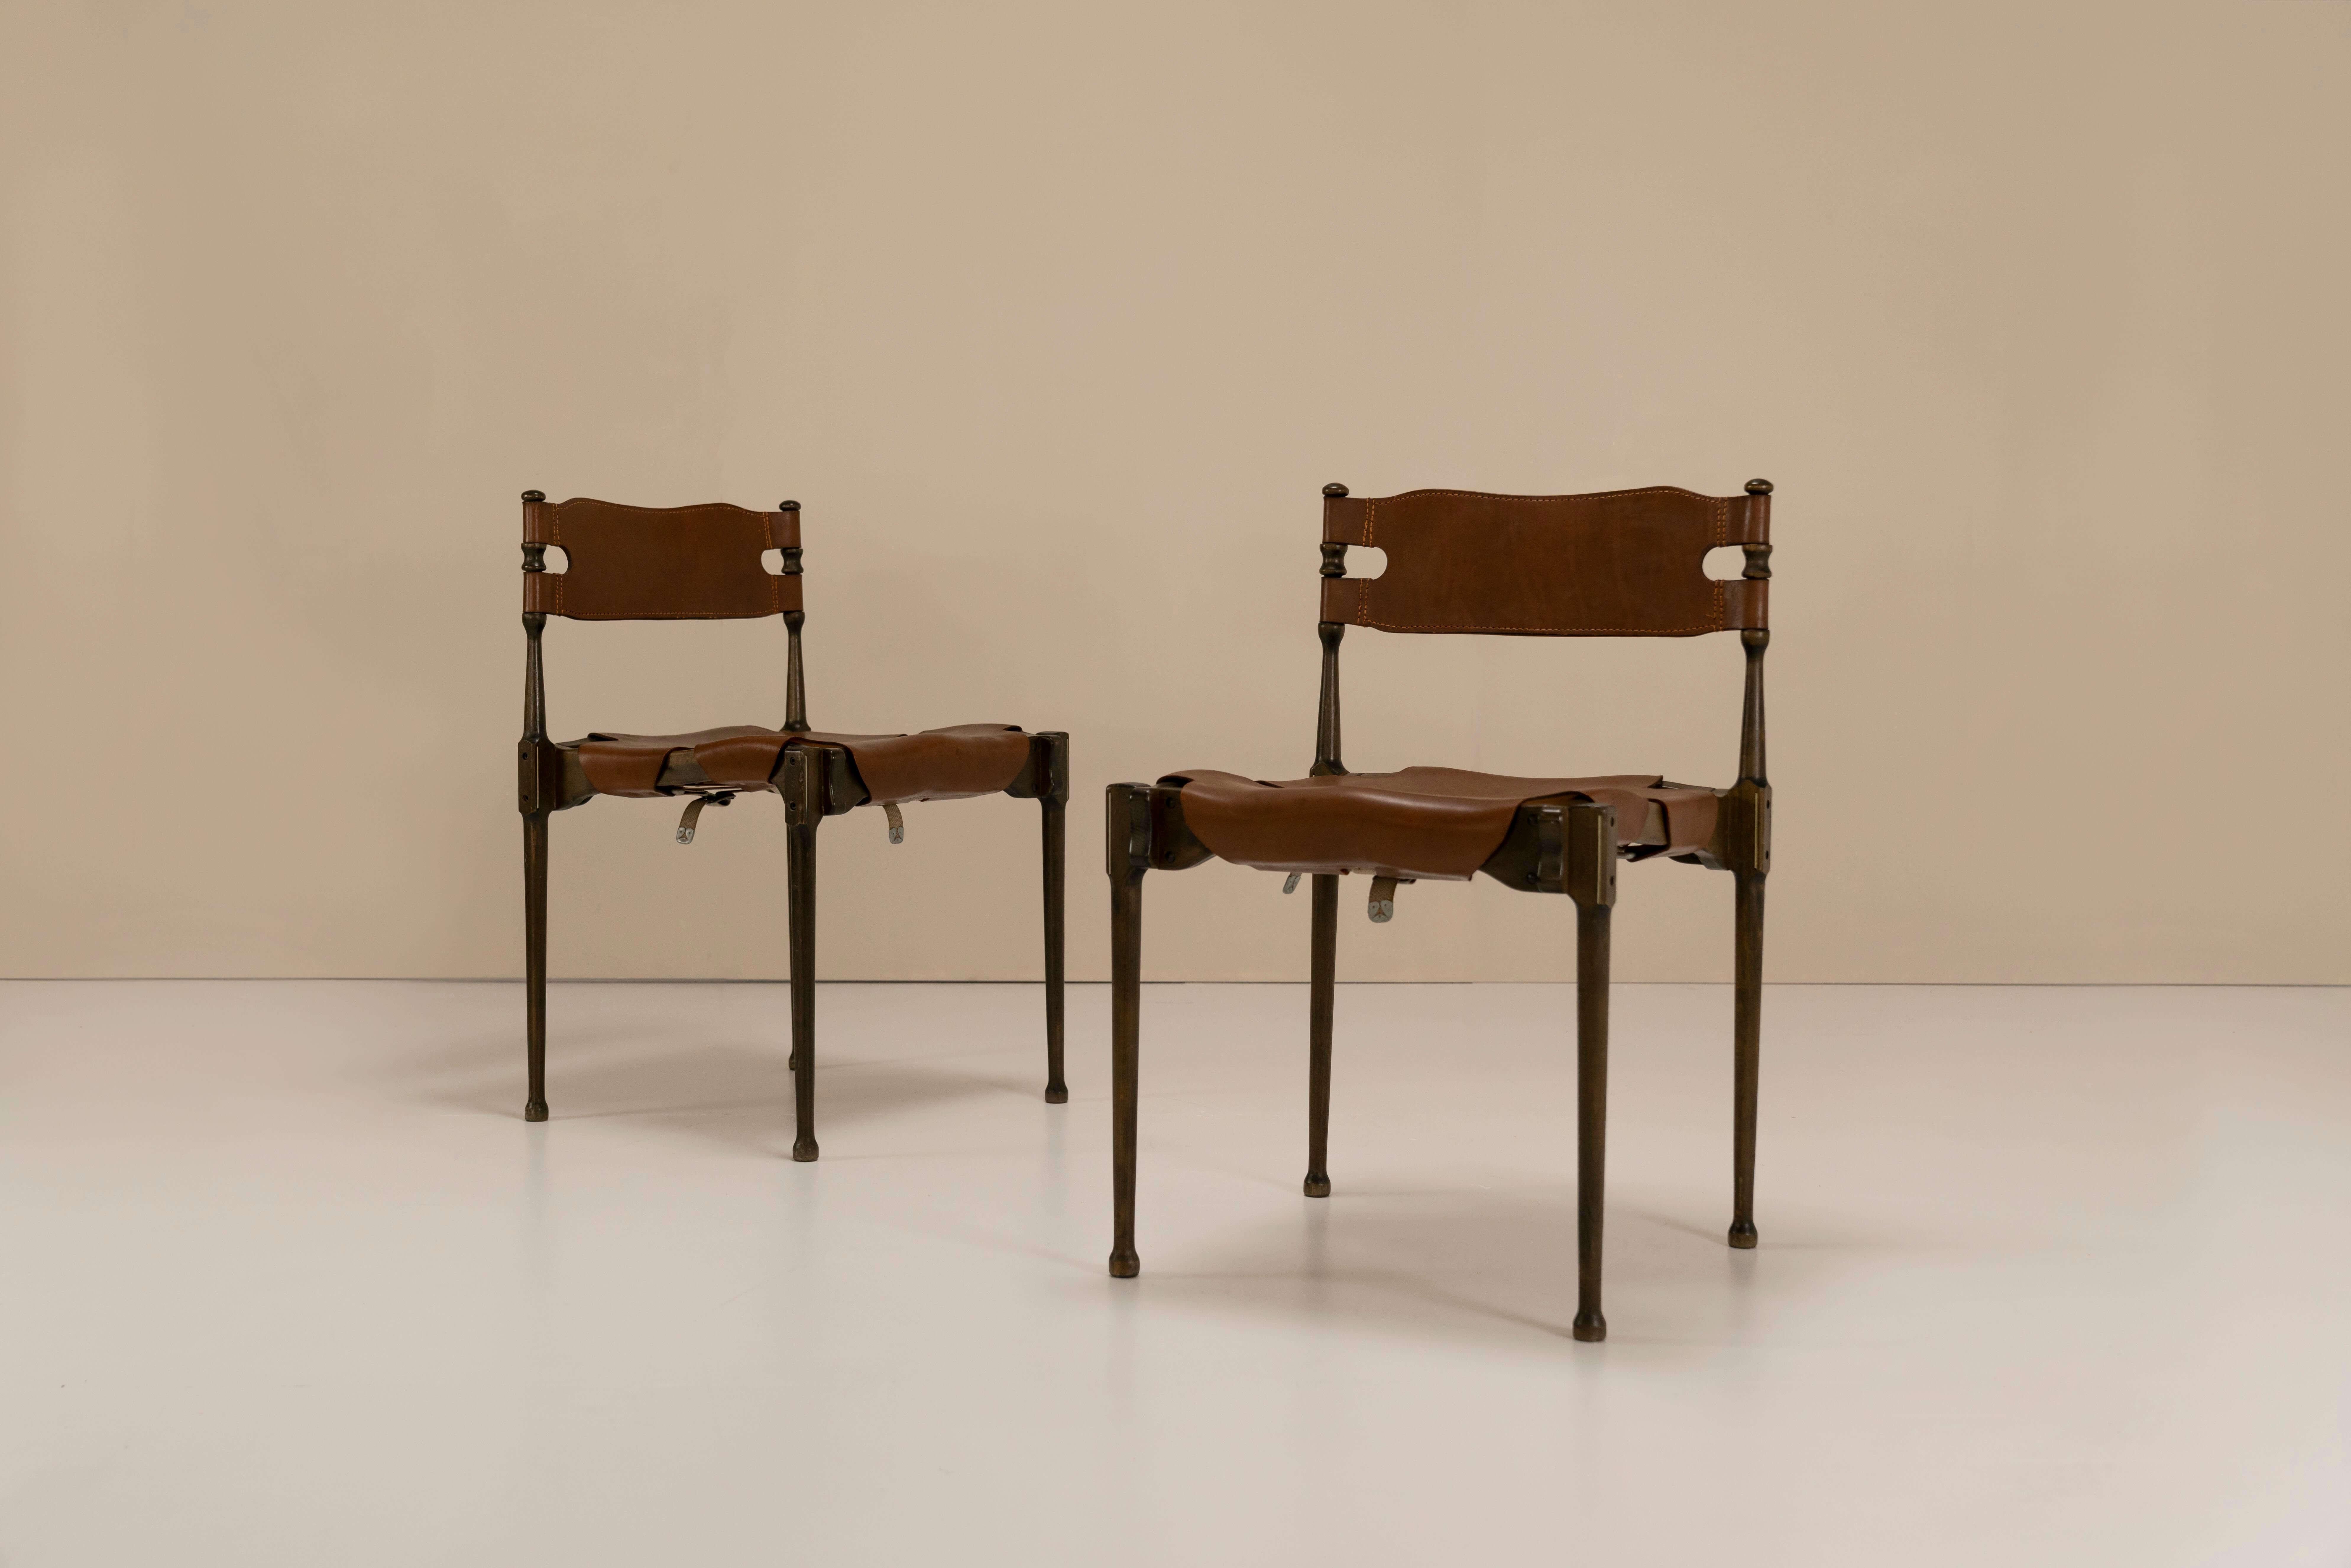 Extraordinary “Montreal” chairs designed by Otto Frei in stained beech and leather from 1967. The German architect Otto Frei rose to prominence in 1967 when he was commissioned to design the German pavilion at the world expo in Montreal Canada. He